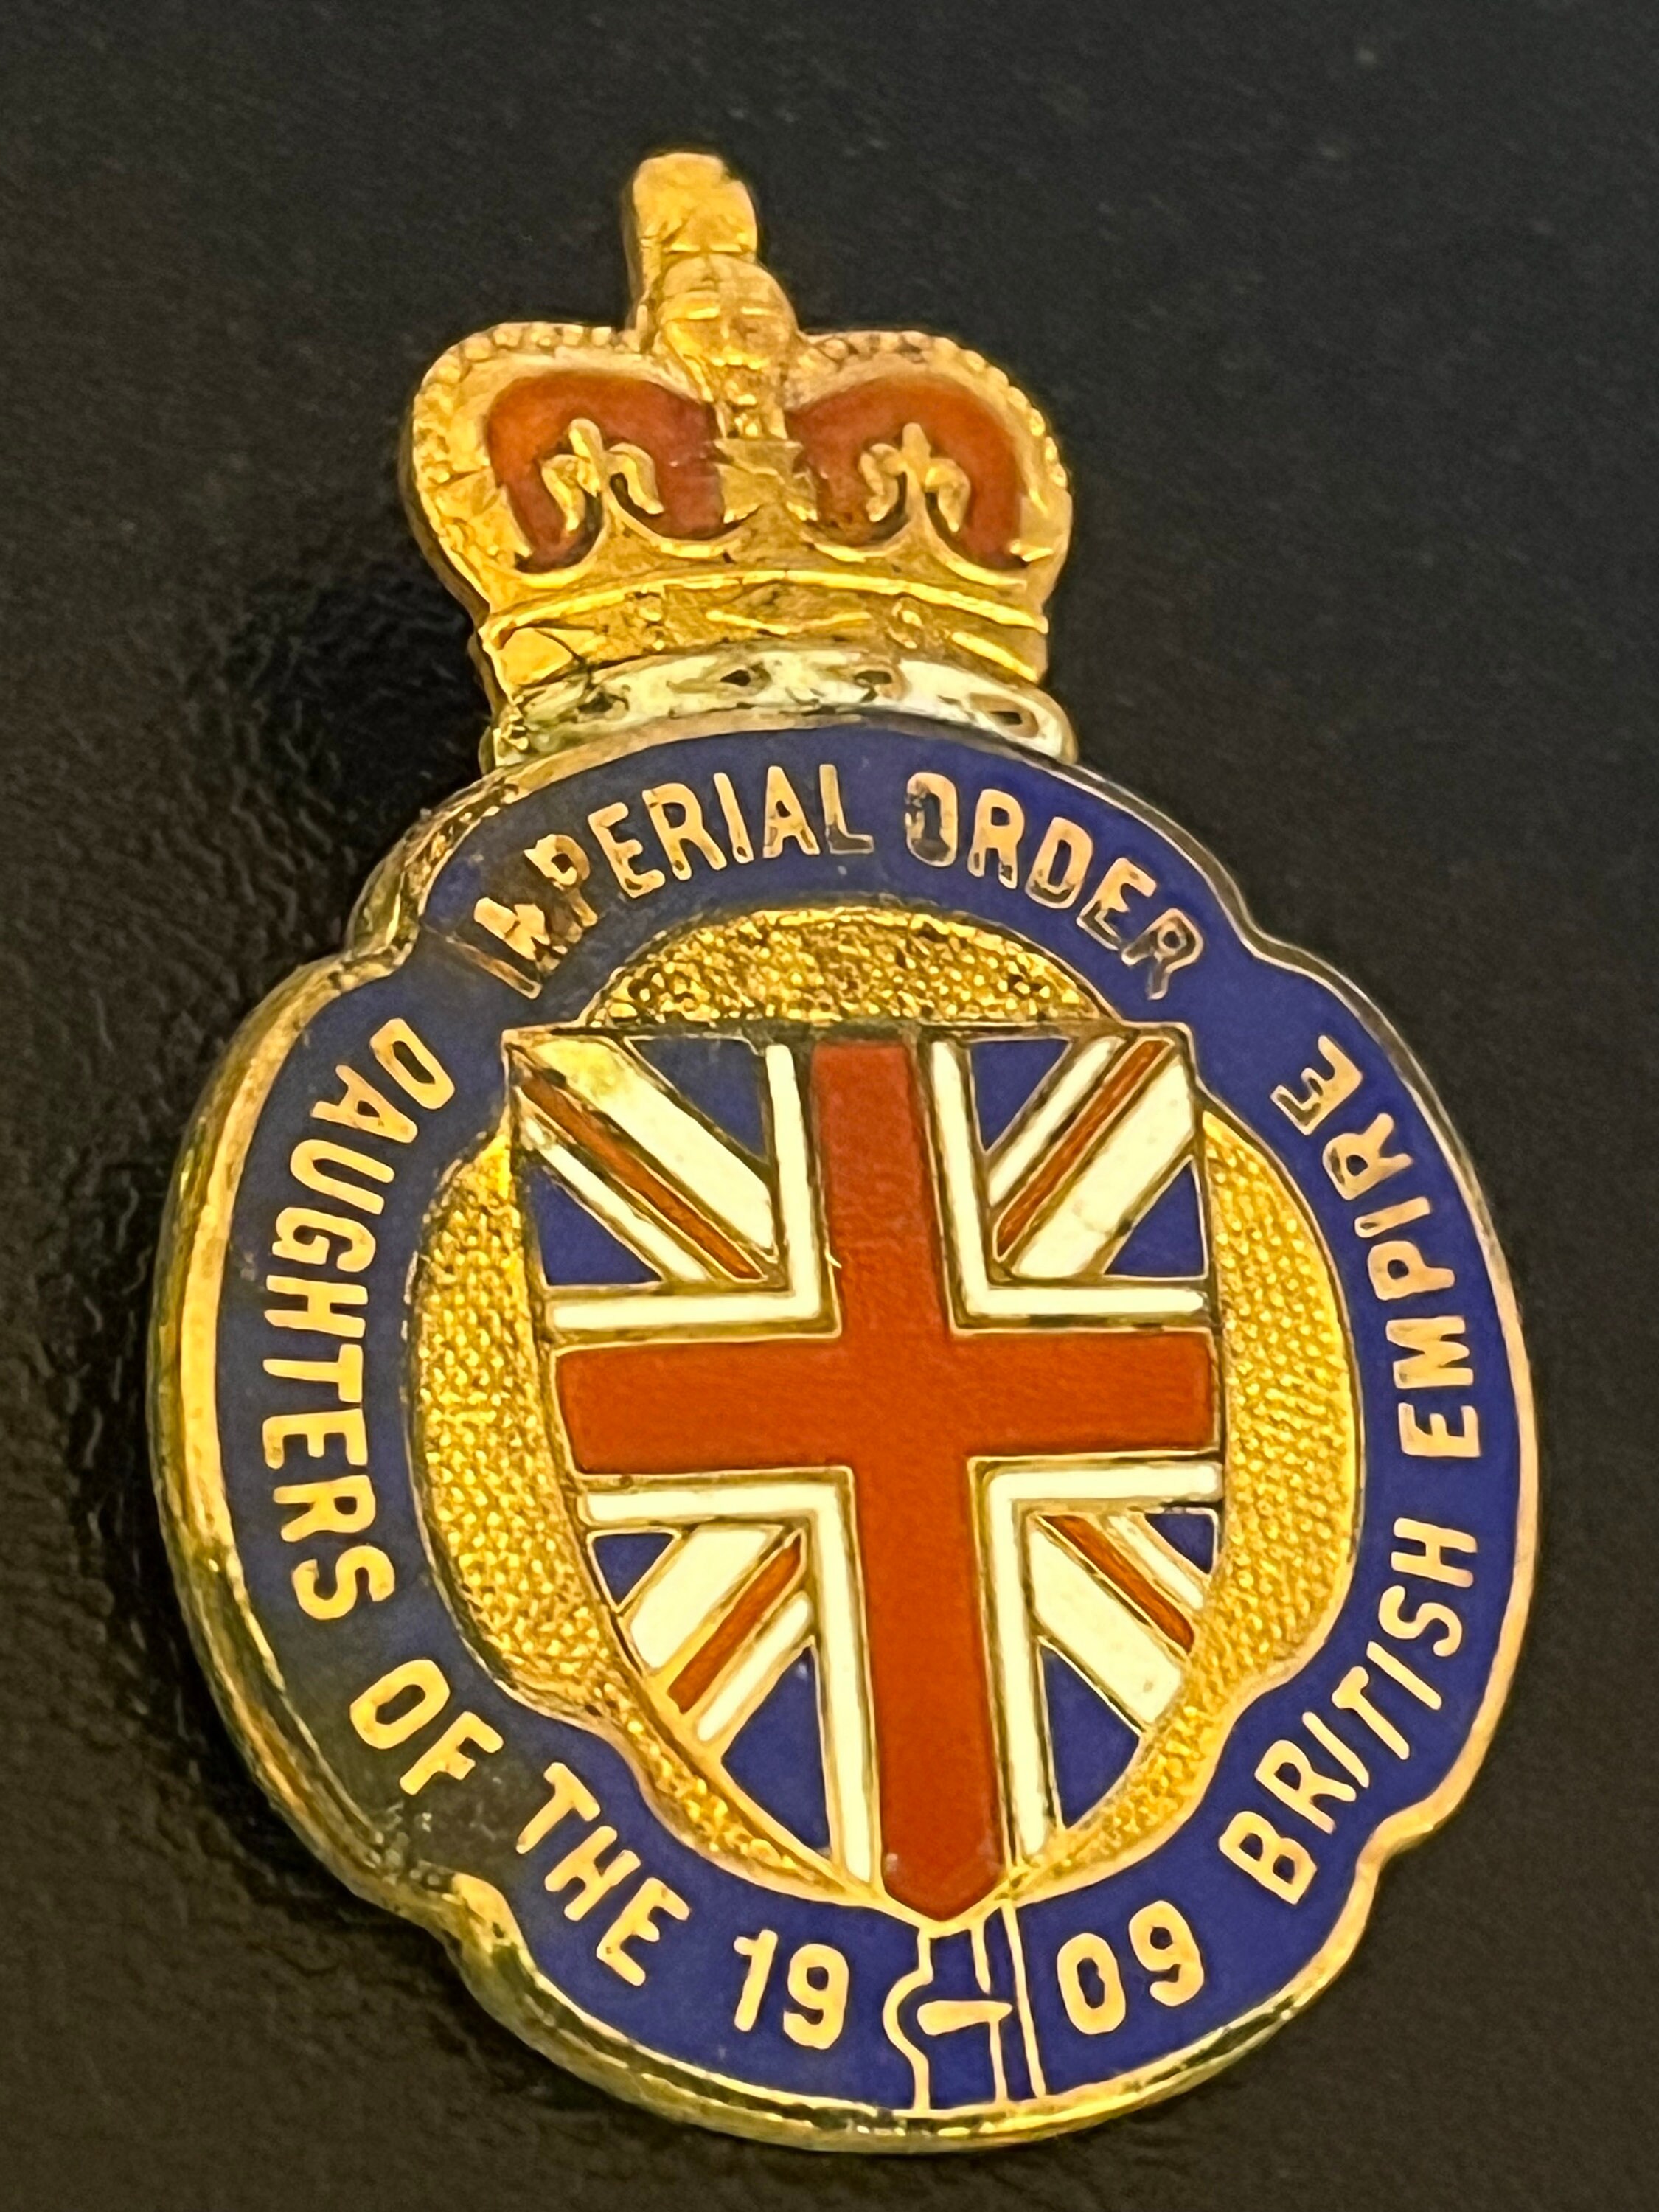 Imperial Order Daughters of the British Empire 1909 Lapel Pin 